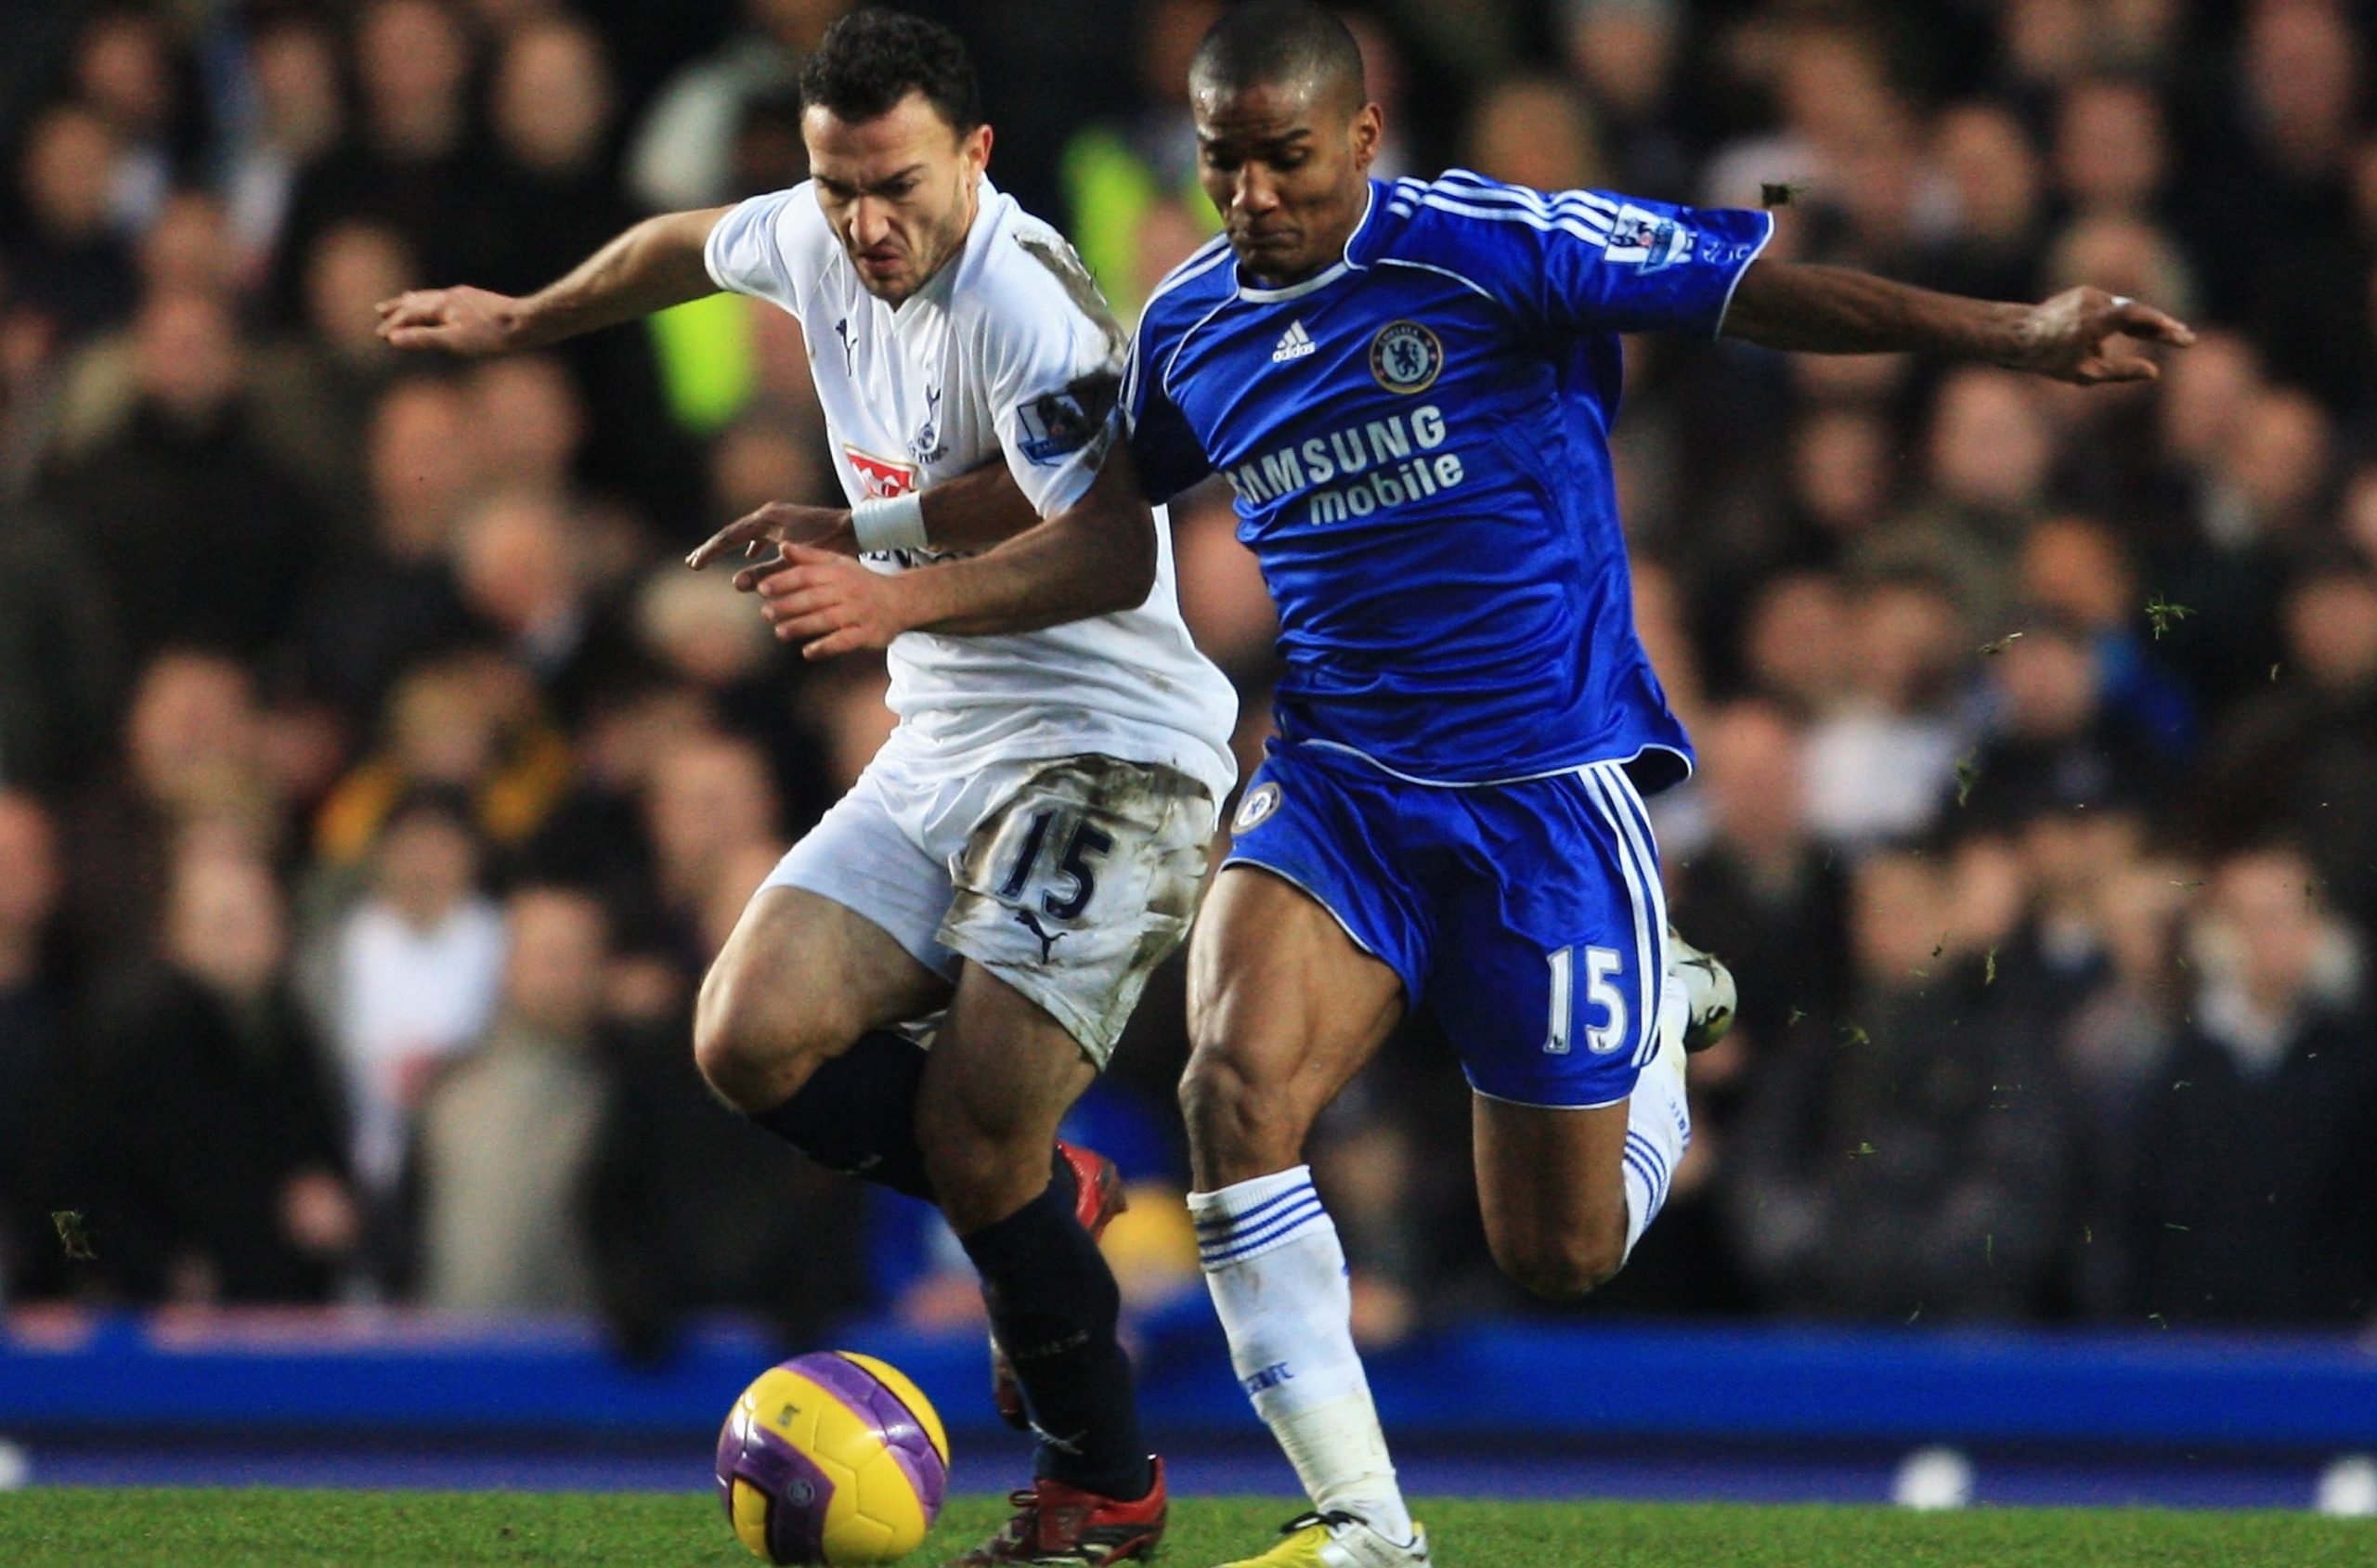 Steed Malbranque of Tottenham Hotspur challenges Florent Malouda of Chelsea - January 2008.